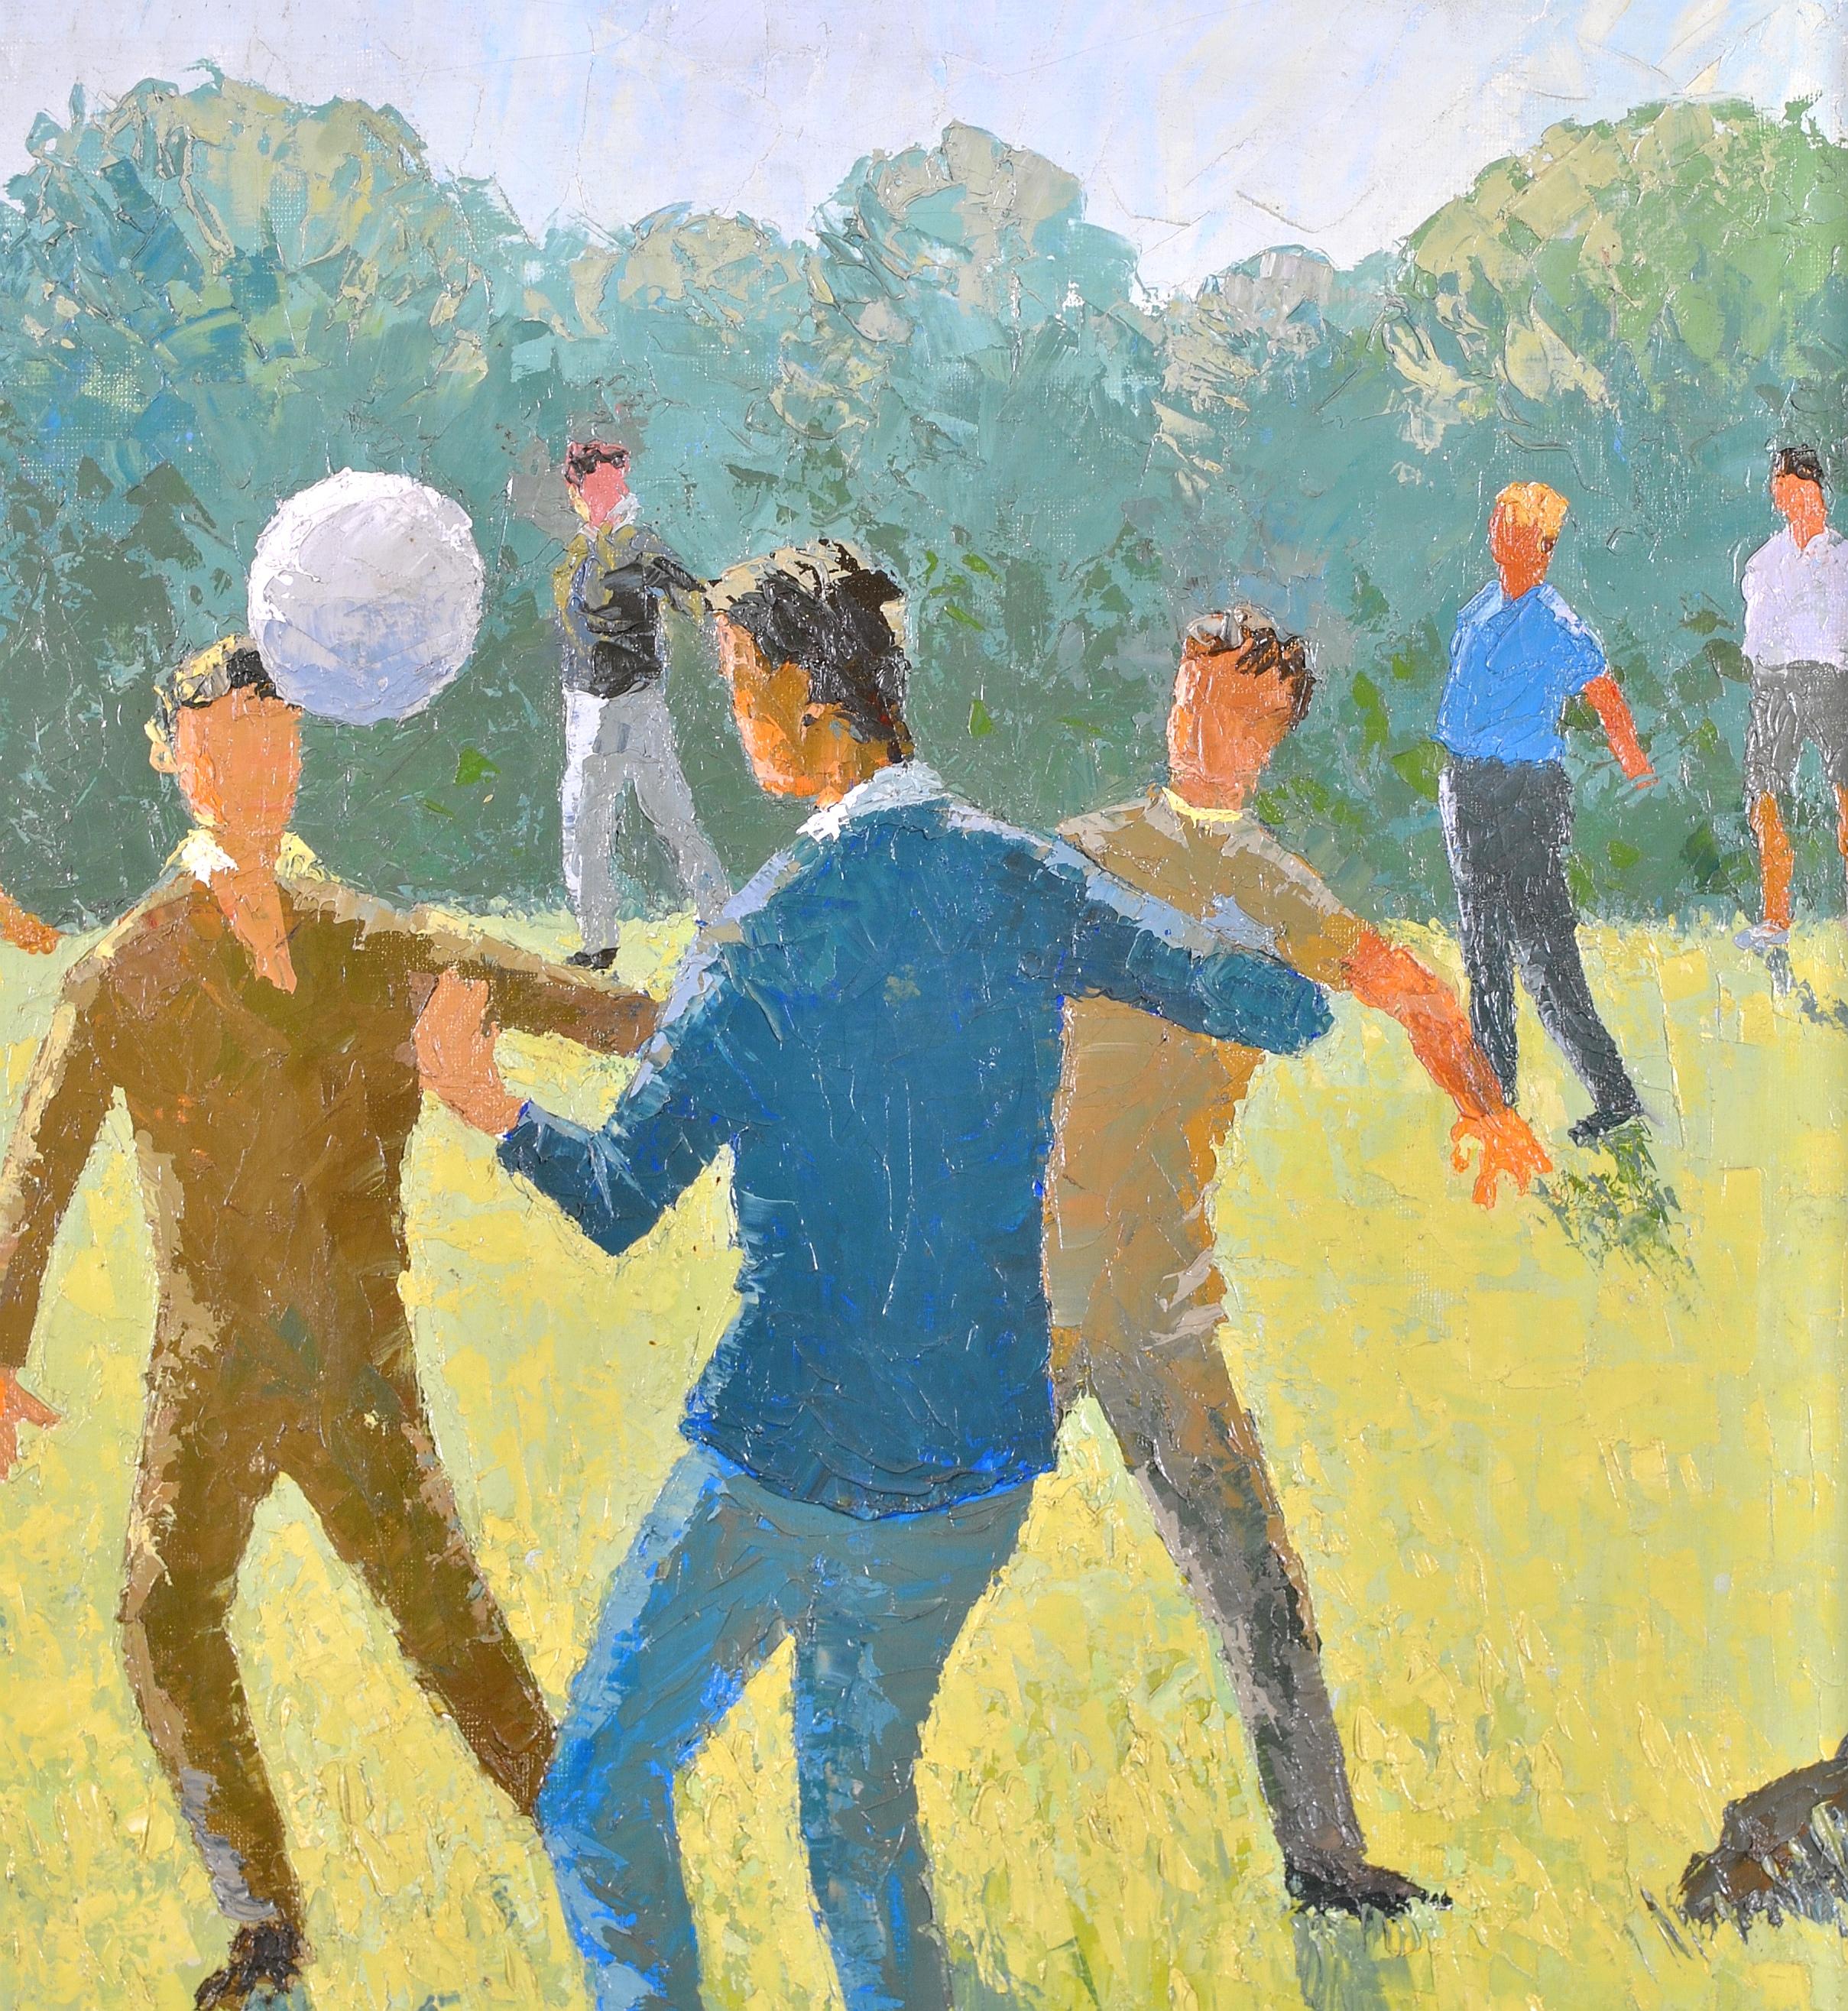 Football in the Park - Modern British Figurative Oil on Canvas Painting - Brown Figurative Painting by David William Burley